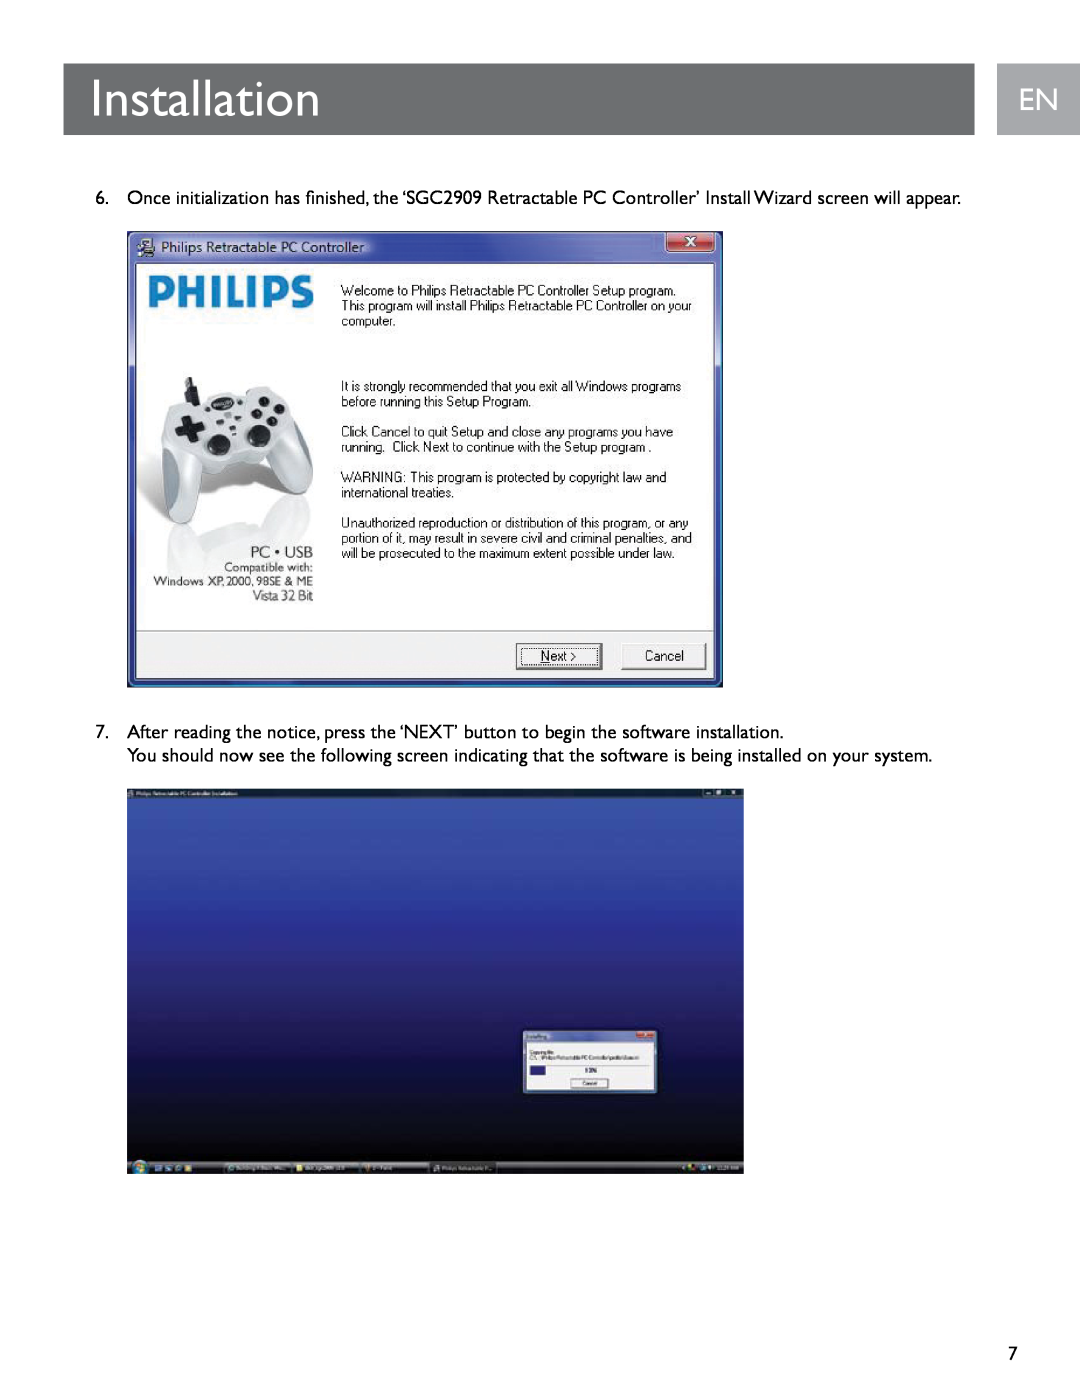 Philips SGC2909 Installation, En En, After reading the notice, press the ‘NEXT’ button to begin the software installation 